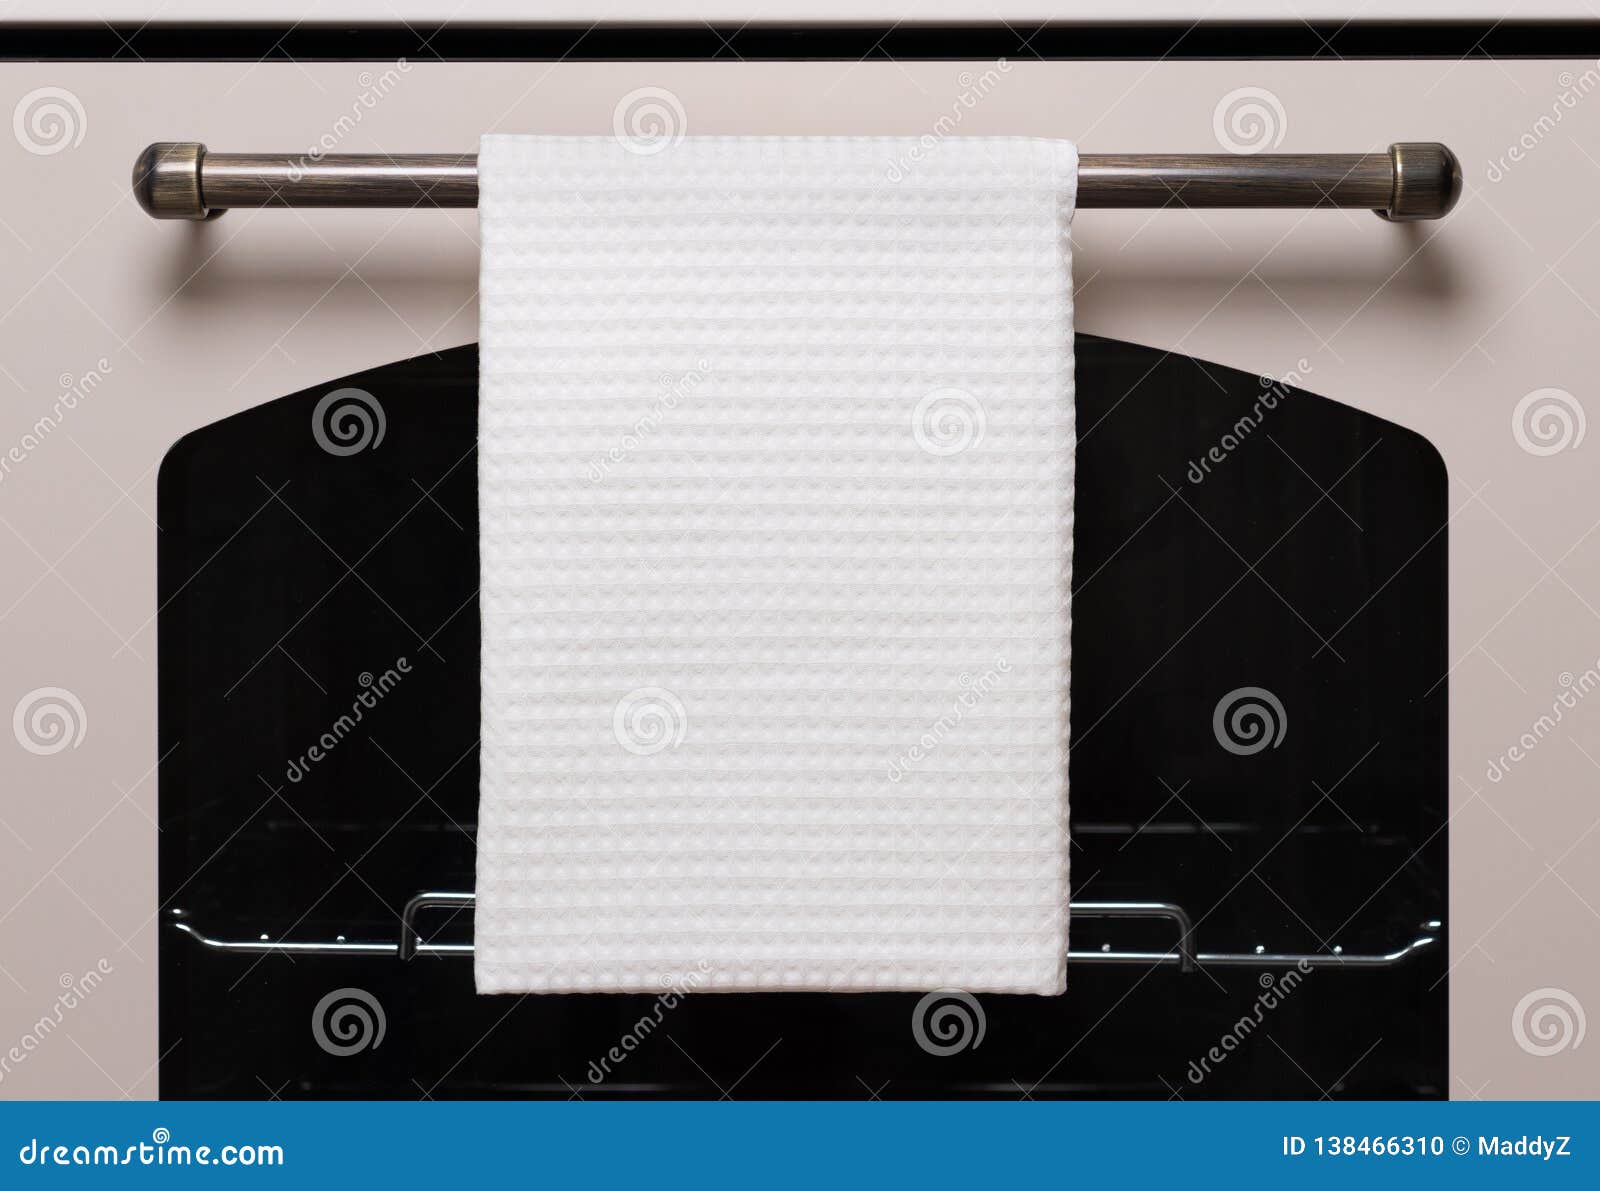 white kitchen towel hangs on the oven handle, product mockup